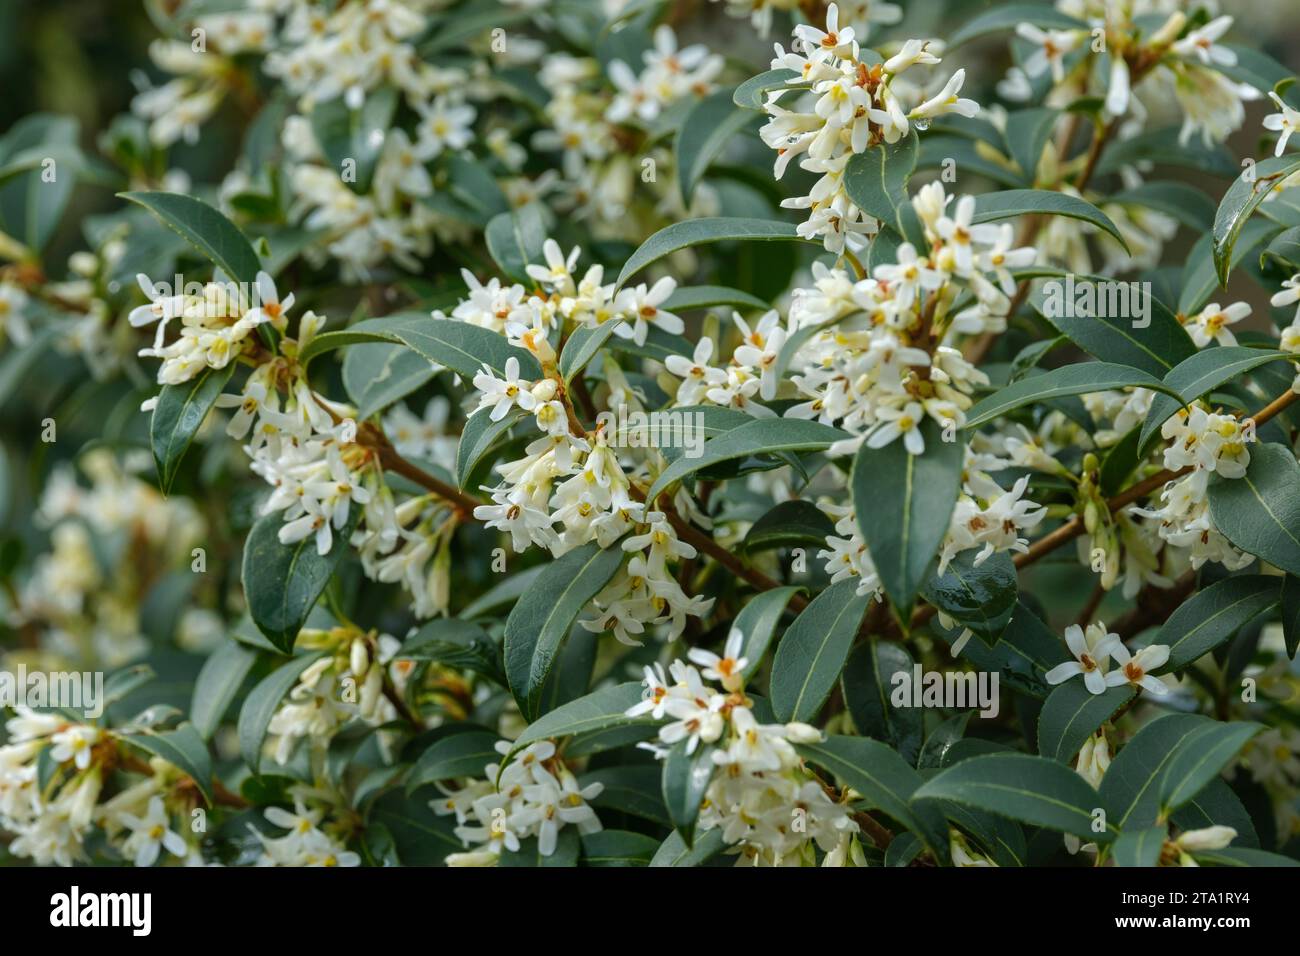 Osmanthus burkwoodii, Osmarea burkwoodii, Burkwood osmanthus, clusters of small white flowers in early spring / late winter Stock Photo